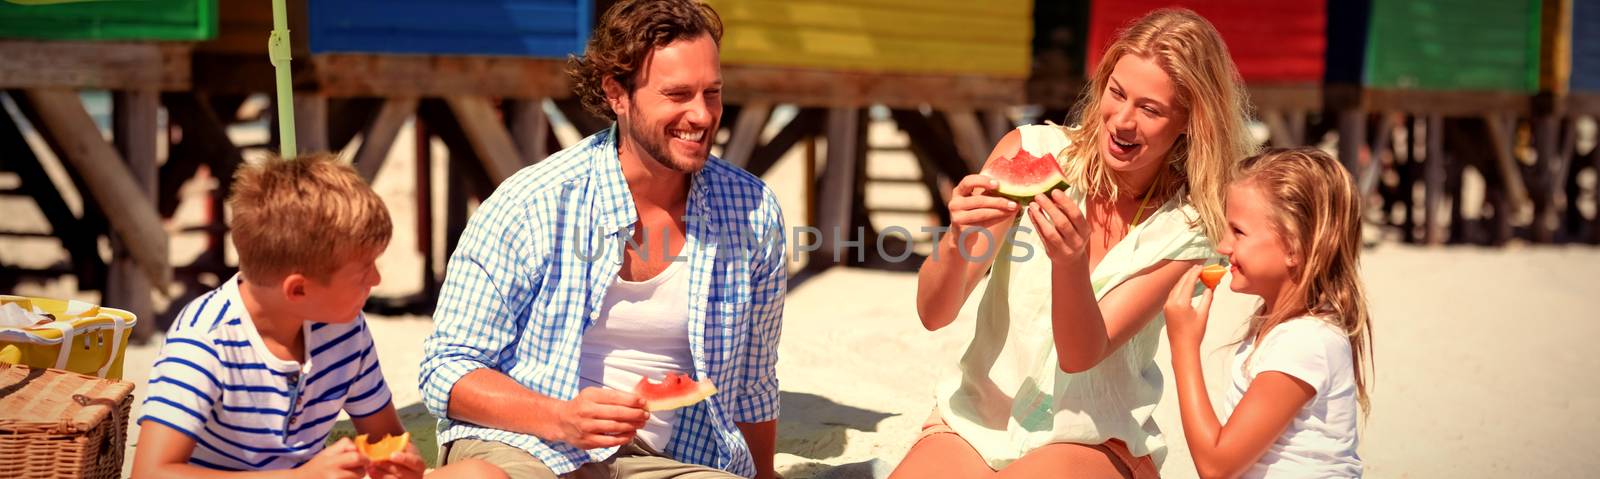 Happy family eating watermelon while sitting together at beach by Wavebreakmedia